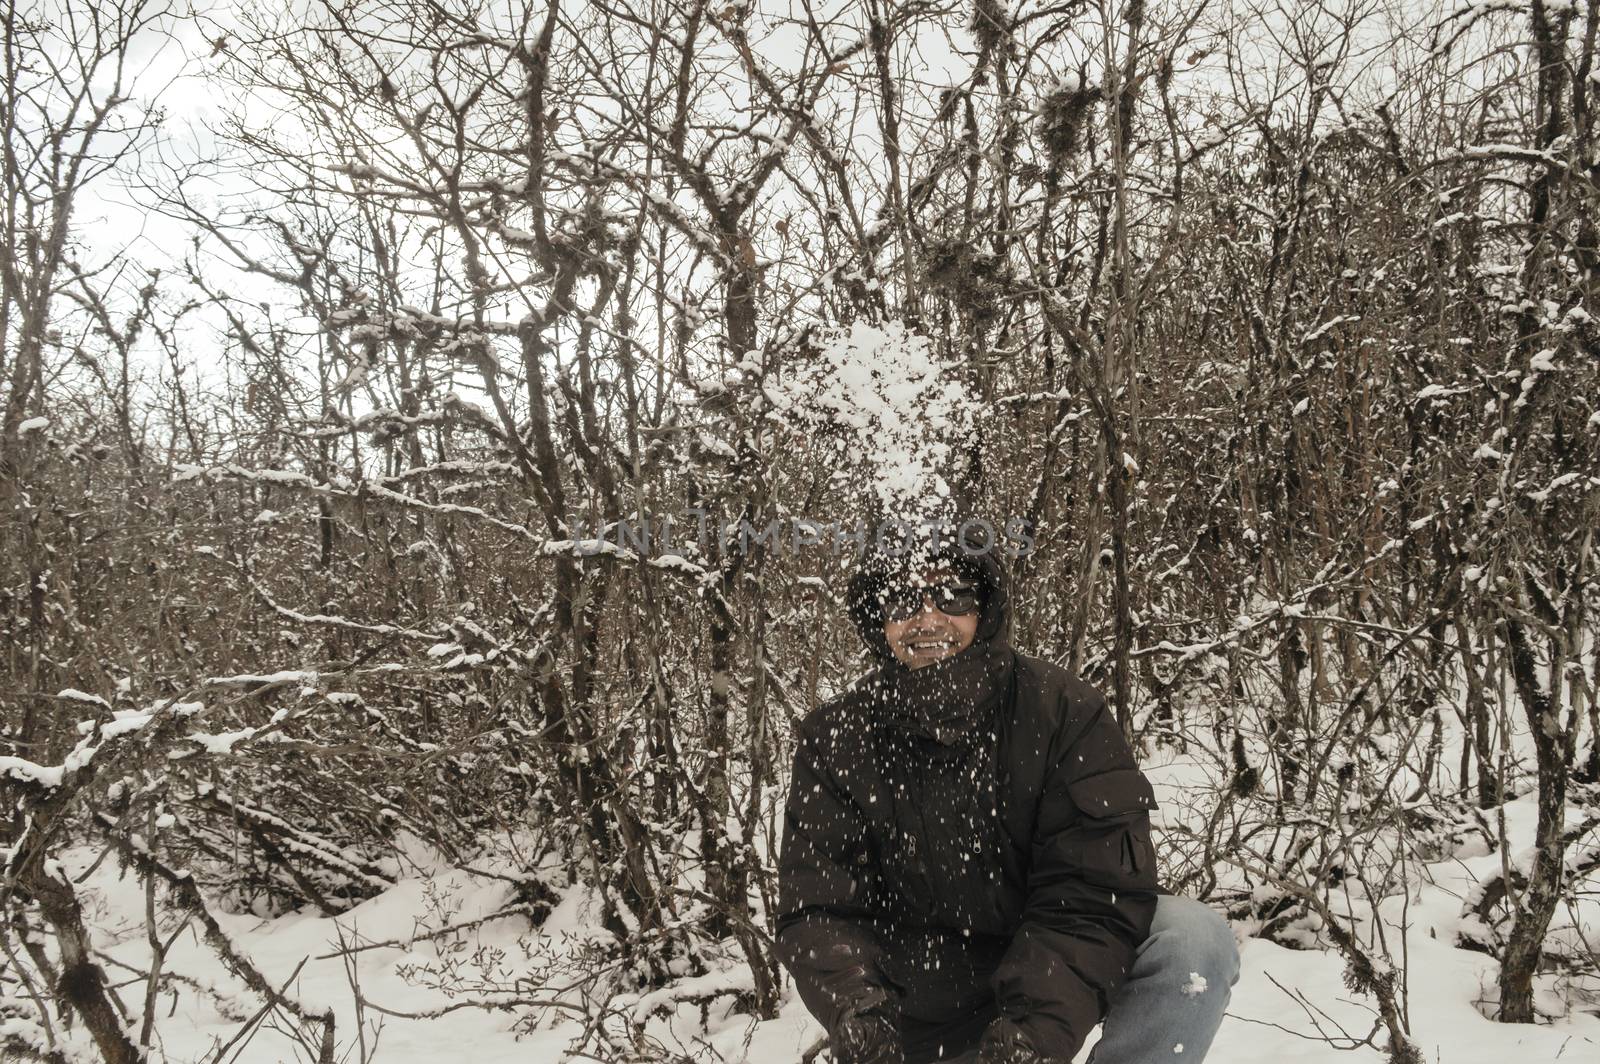 Smiling happy joyful Portrait of a Man wearing a black pullover jacket enjoying first snow playing and throwing snowball in air. Enjoy Snowing day view in winter. Rural village Jammu and Kashmir India by sudiptabhowmick